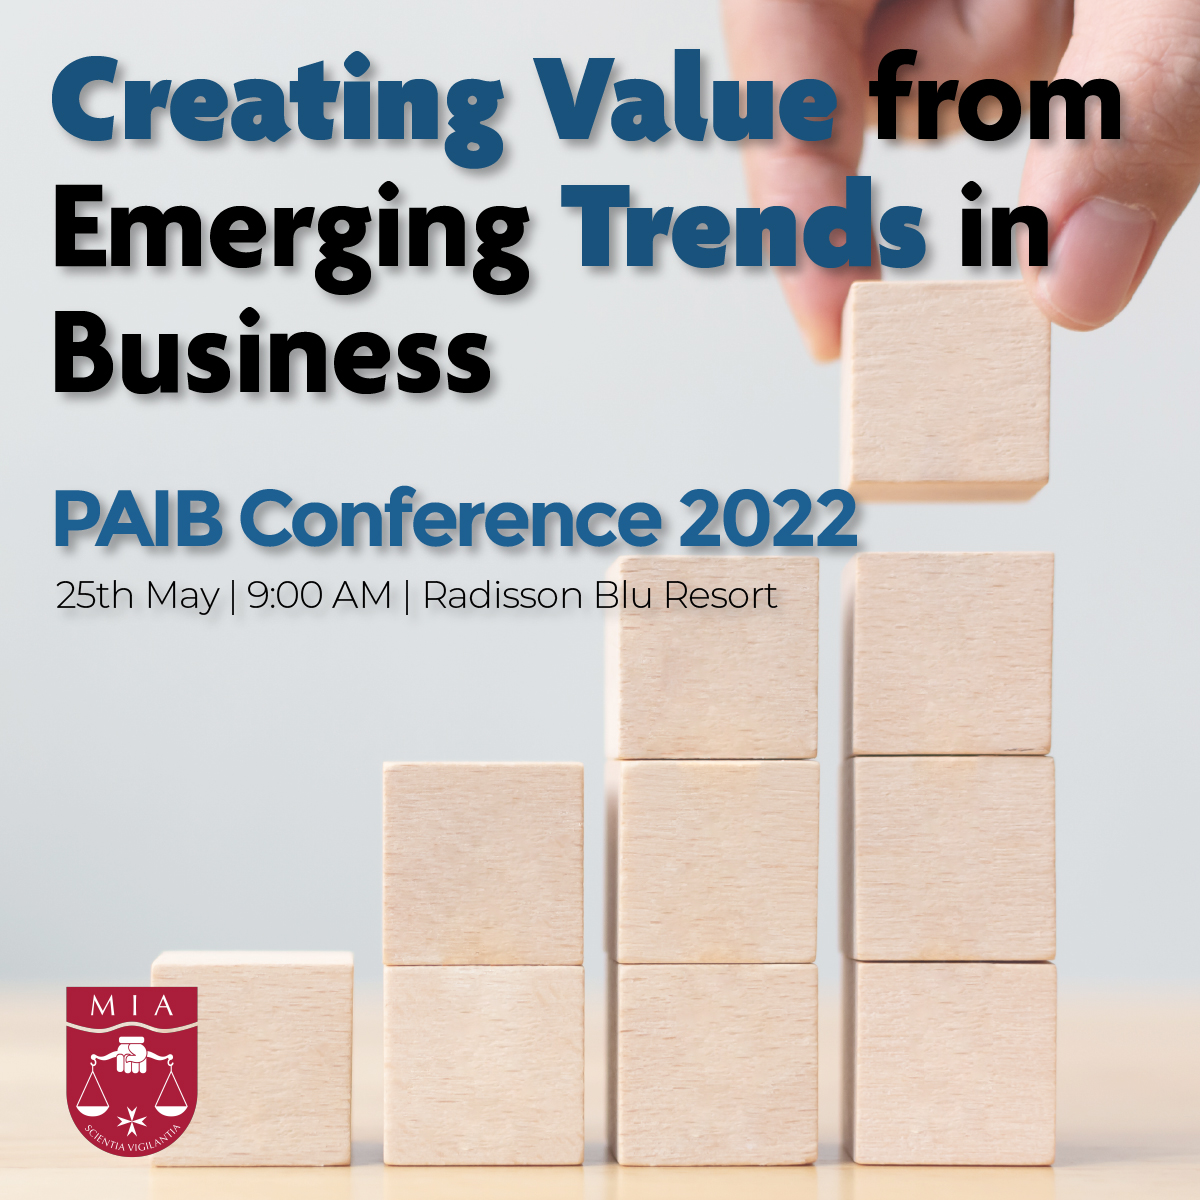 PAIB Conference 2022 – Creating Value from Emerging Trends in Business